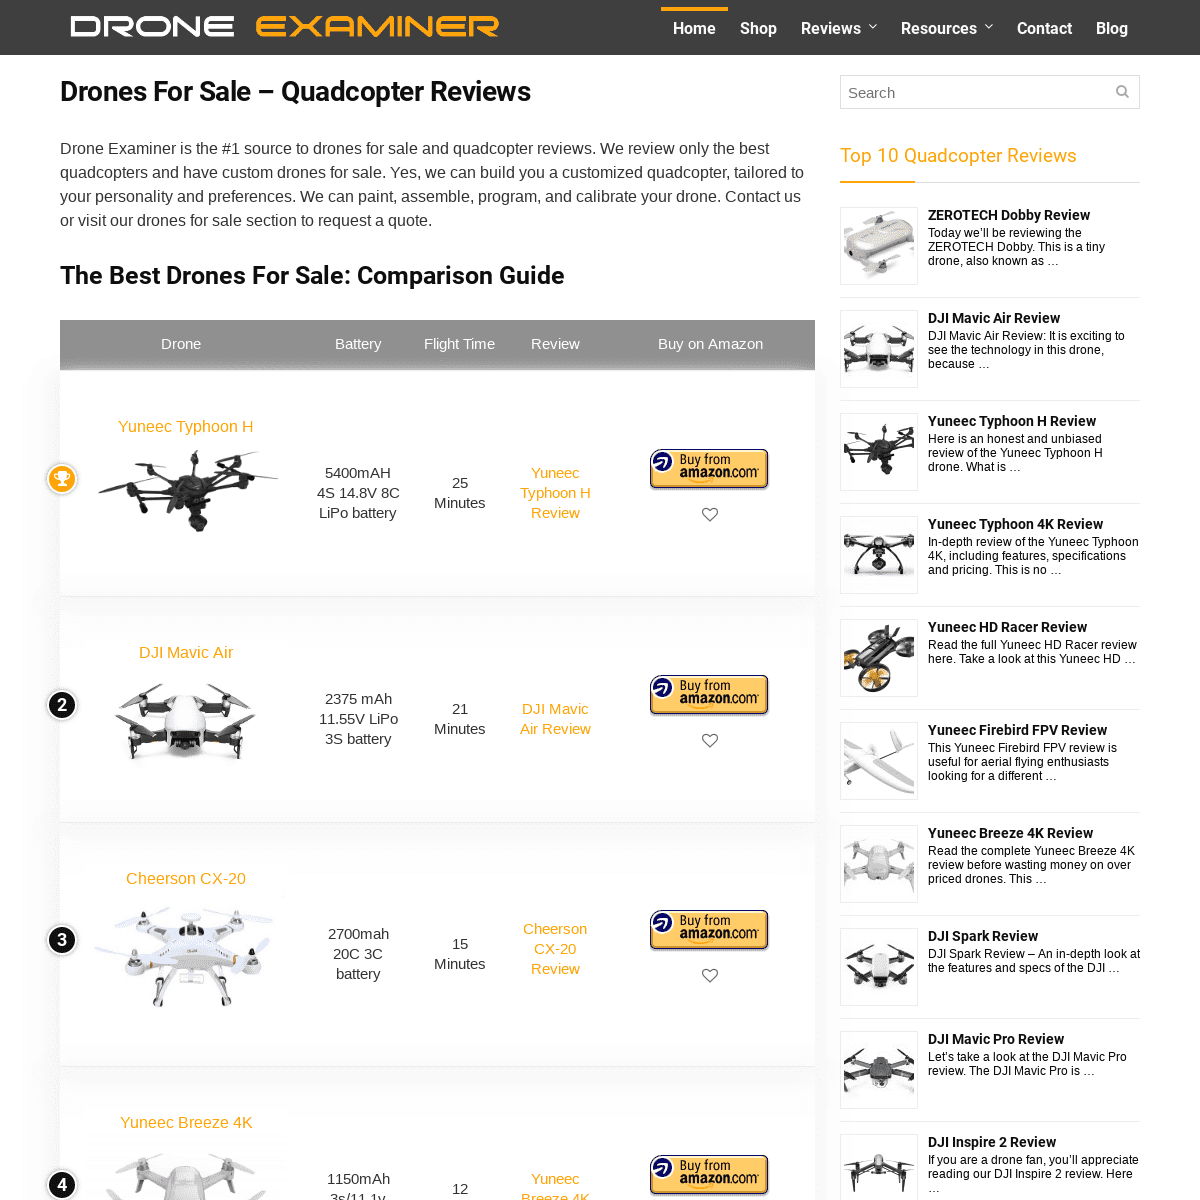 Drones For Sale - Quadcopter Reviews | Drone Examiner